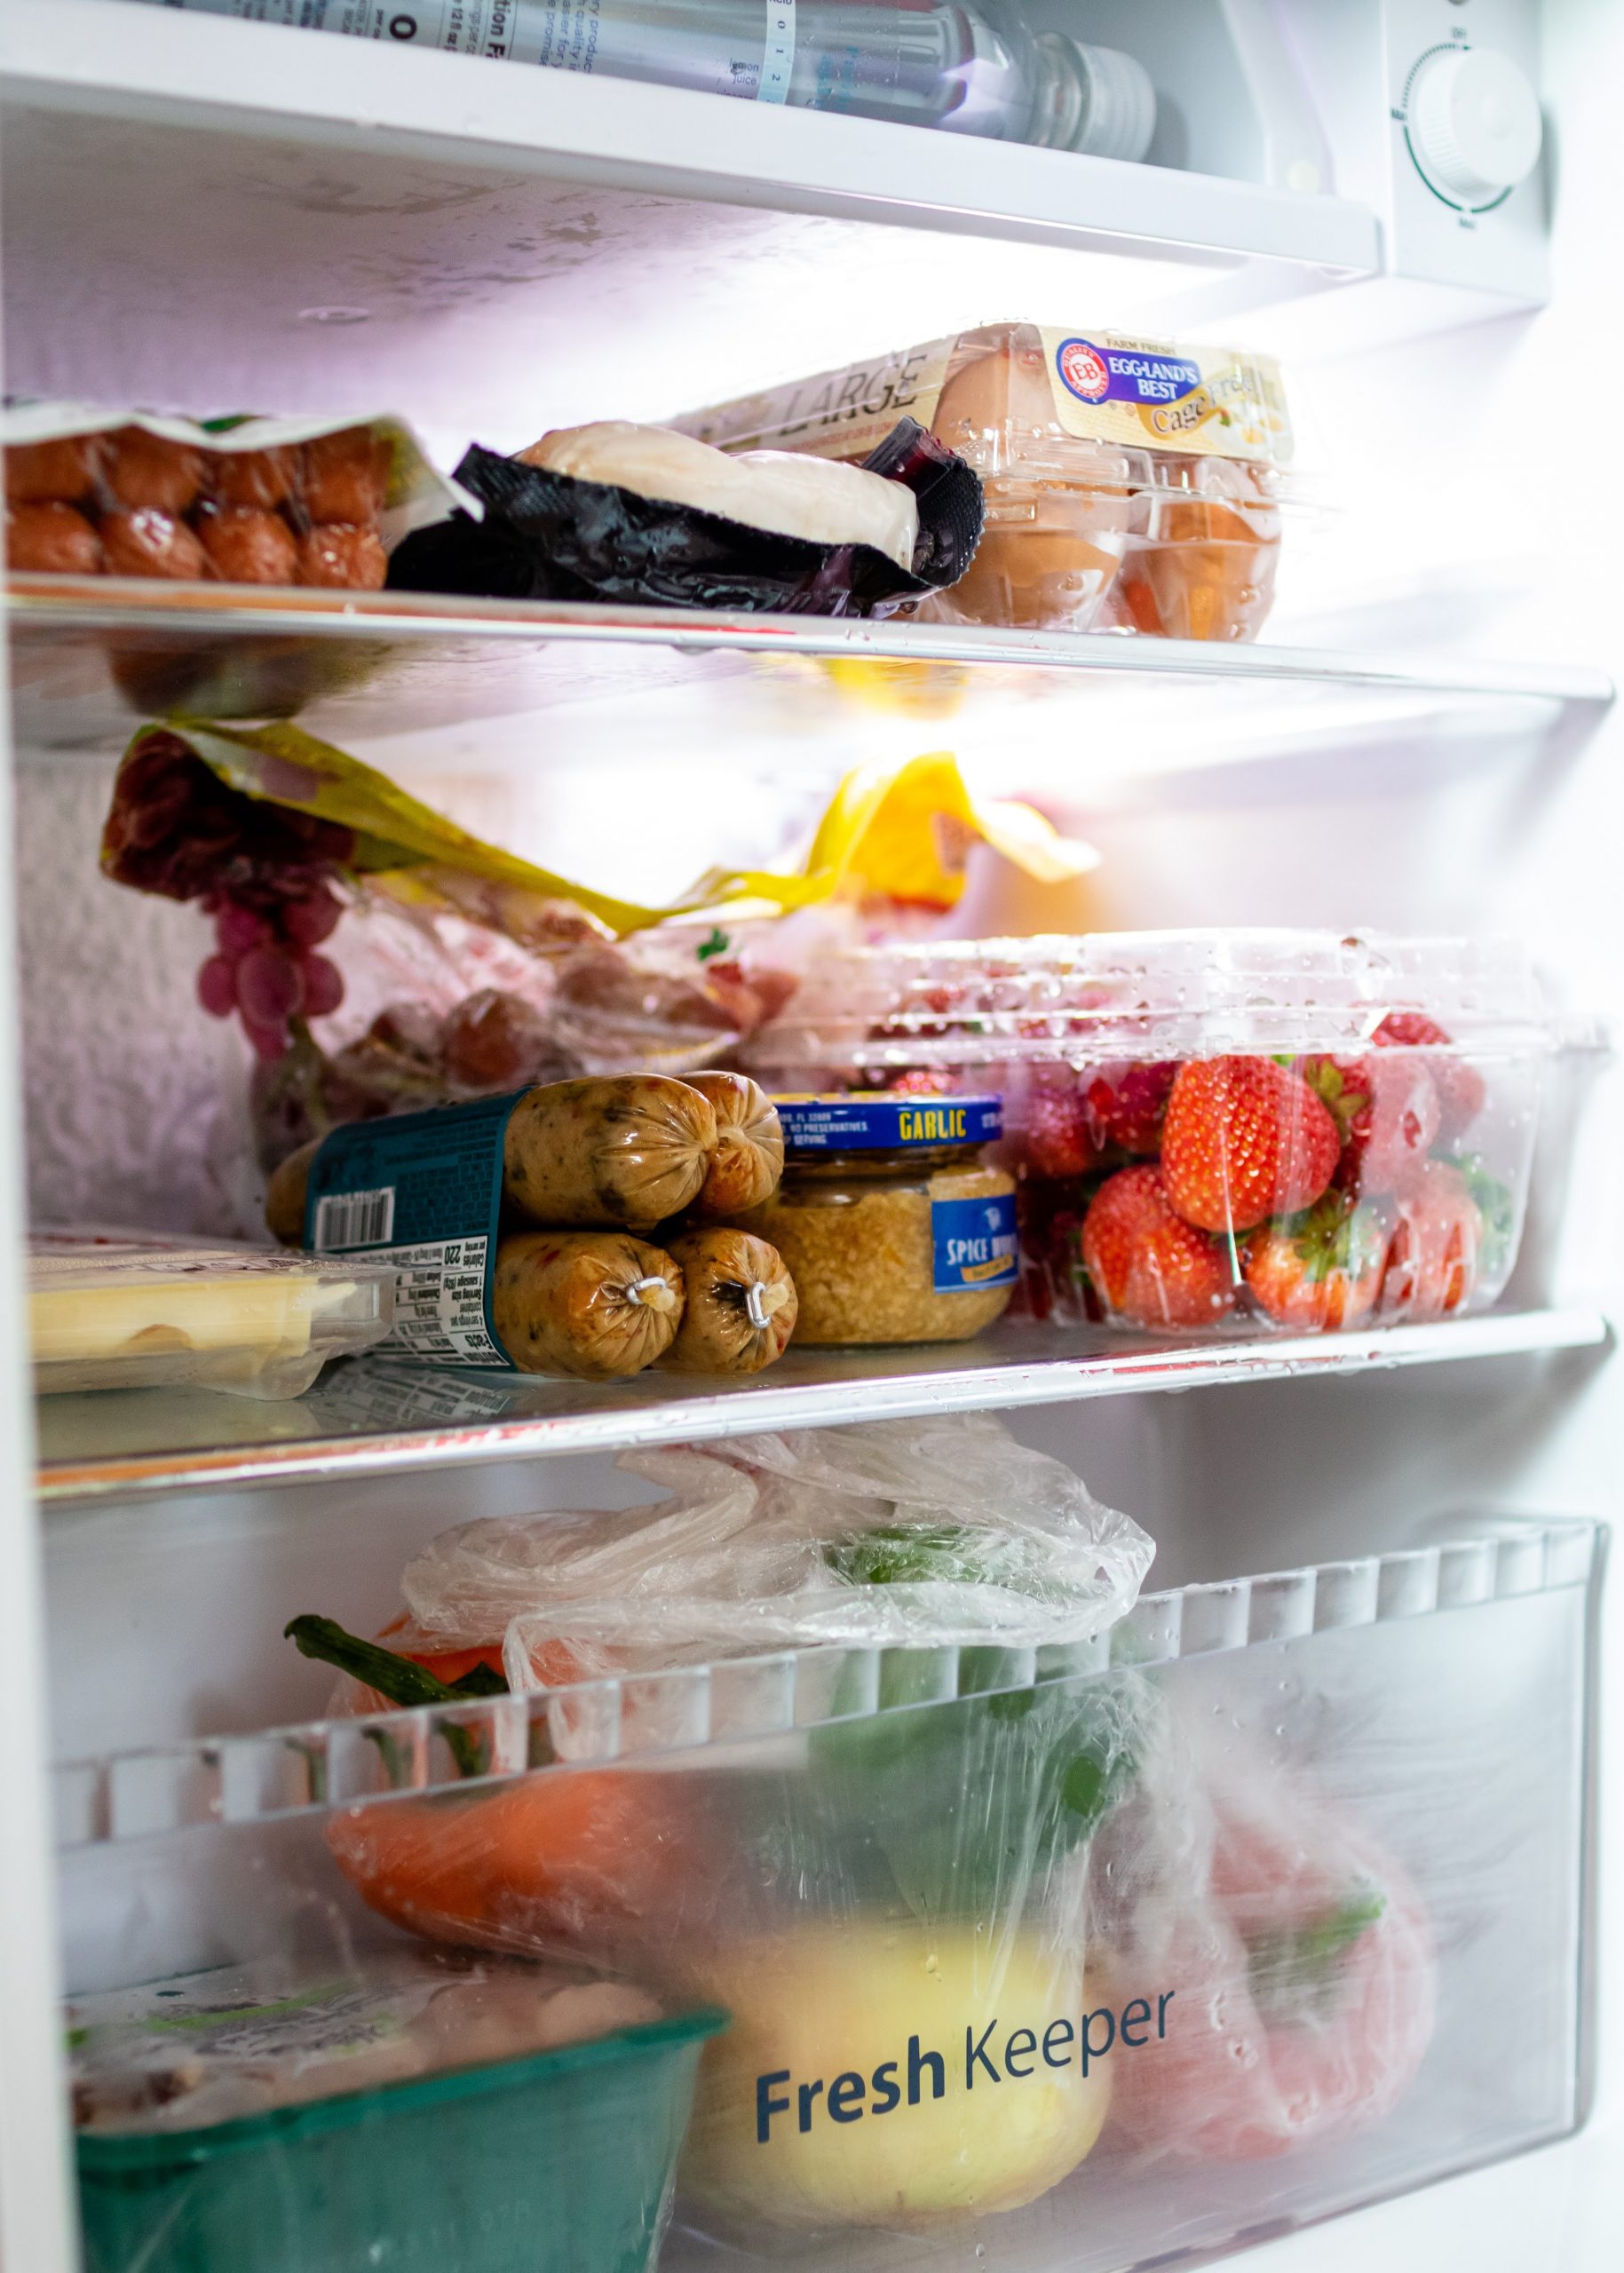 reduce energy consumption by your refrigerator